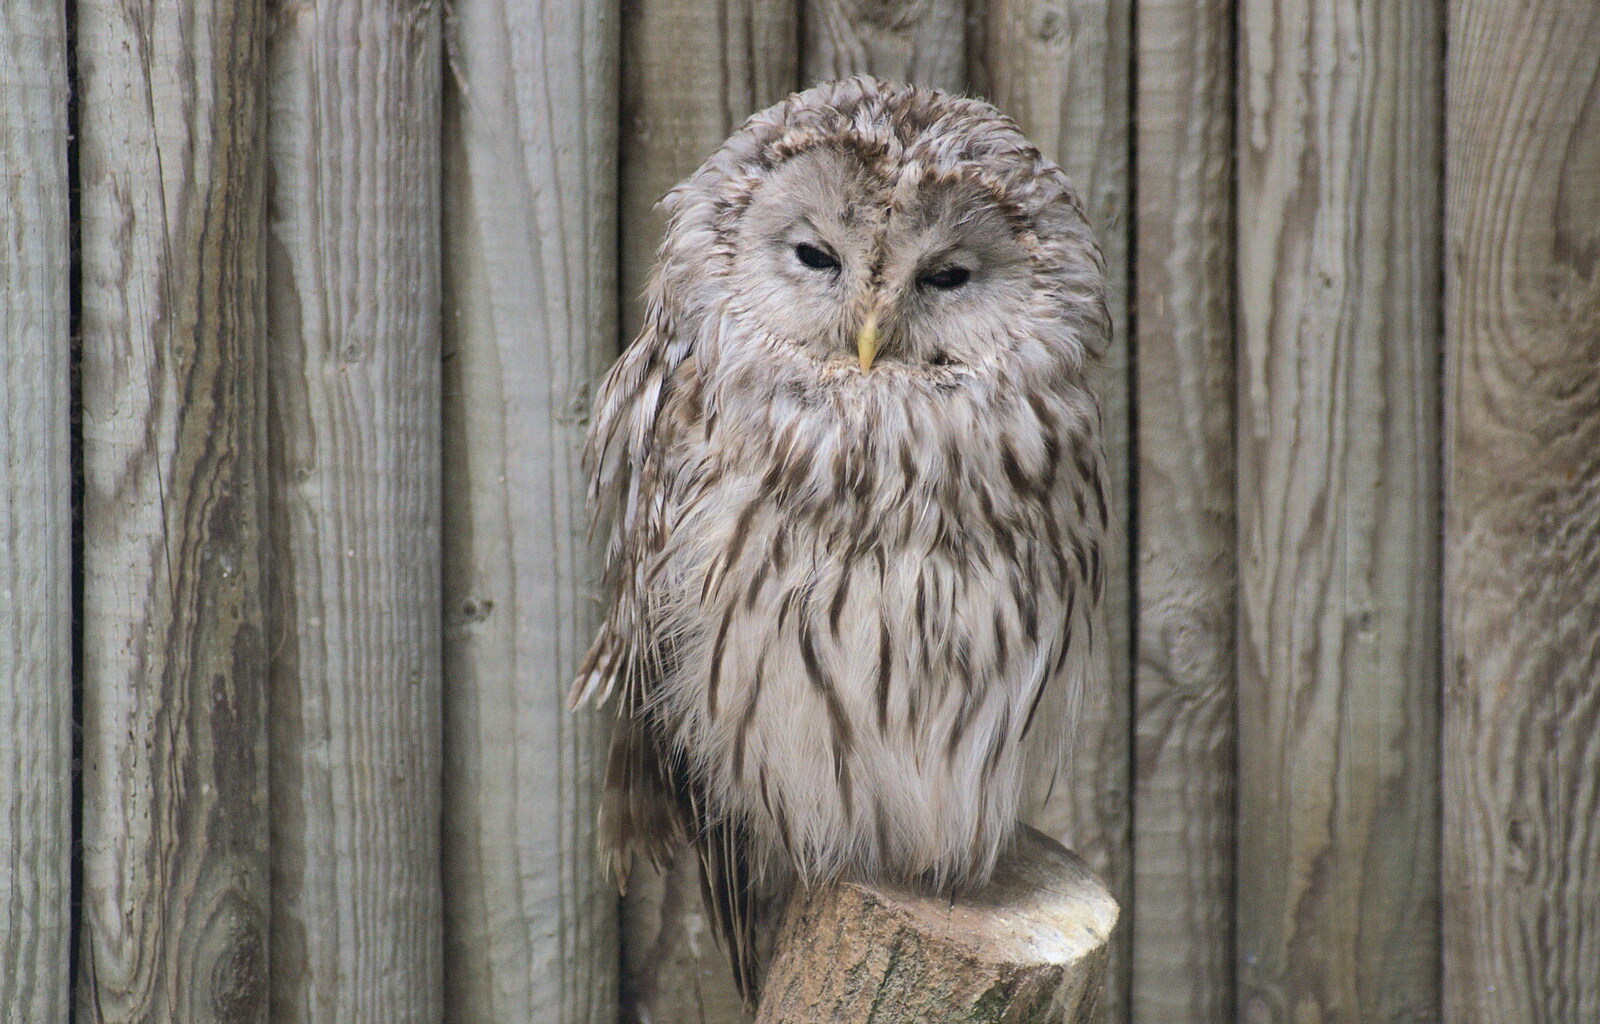 Another half-awake owl from Tiger Cubs at Banham Zoo, Banham, Norfolk - 6th August 2013